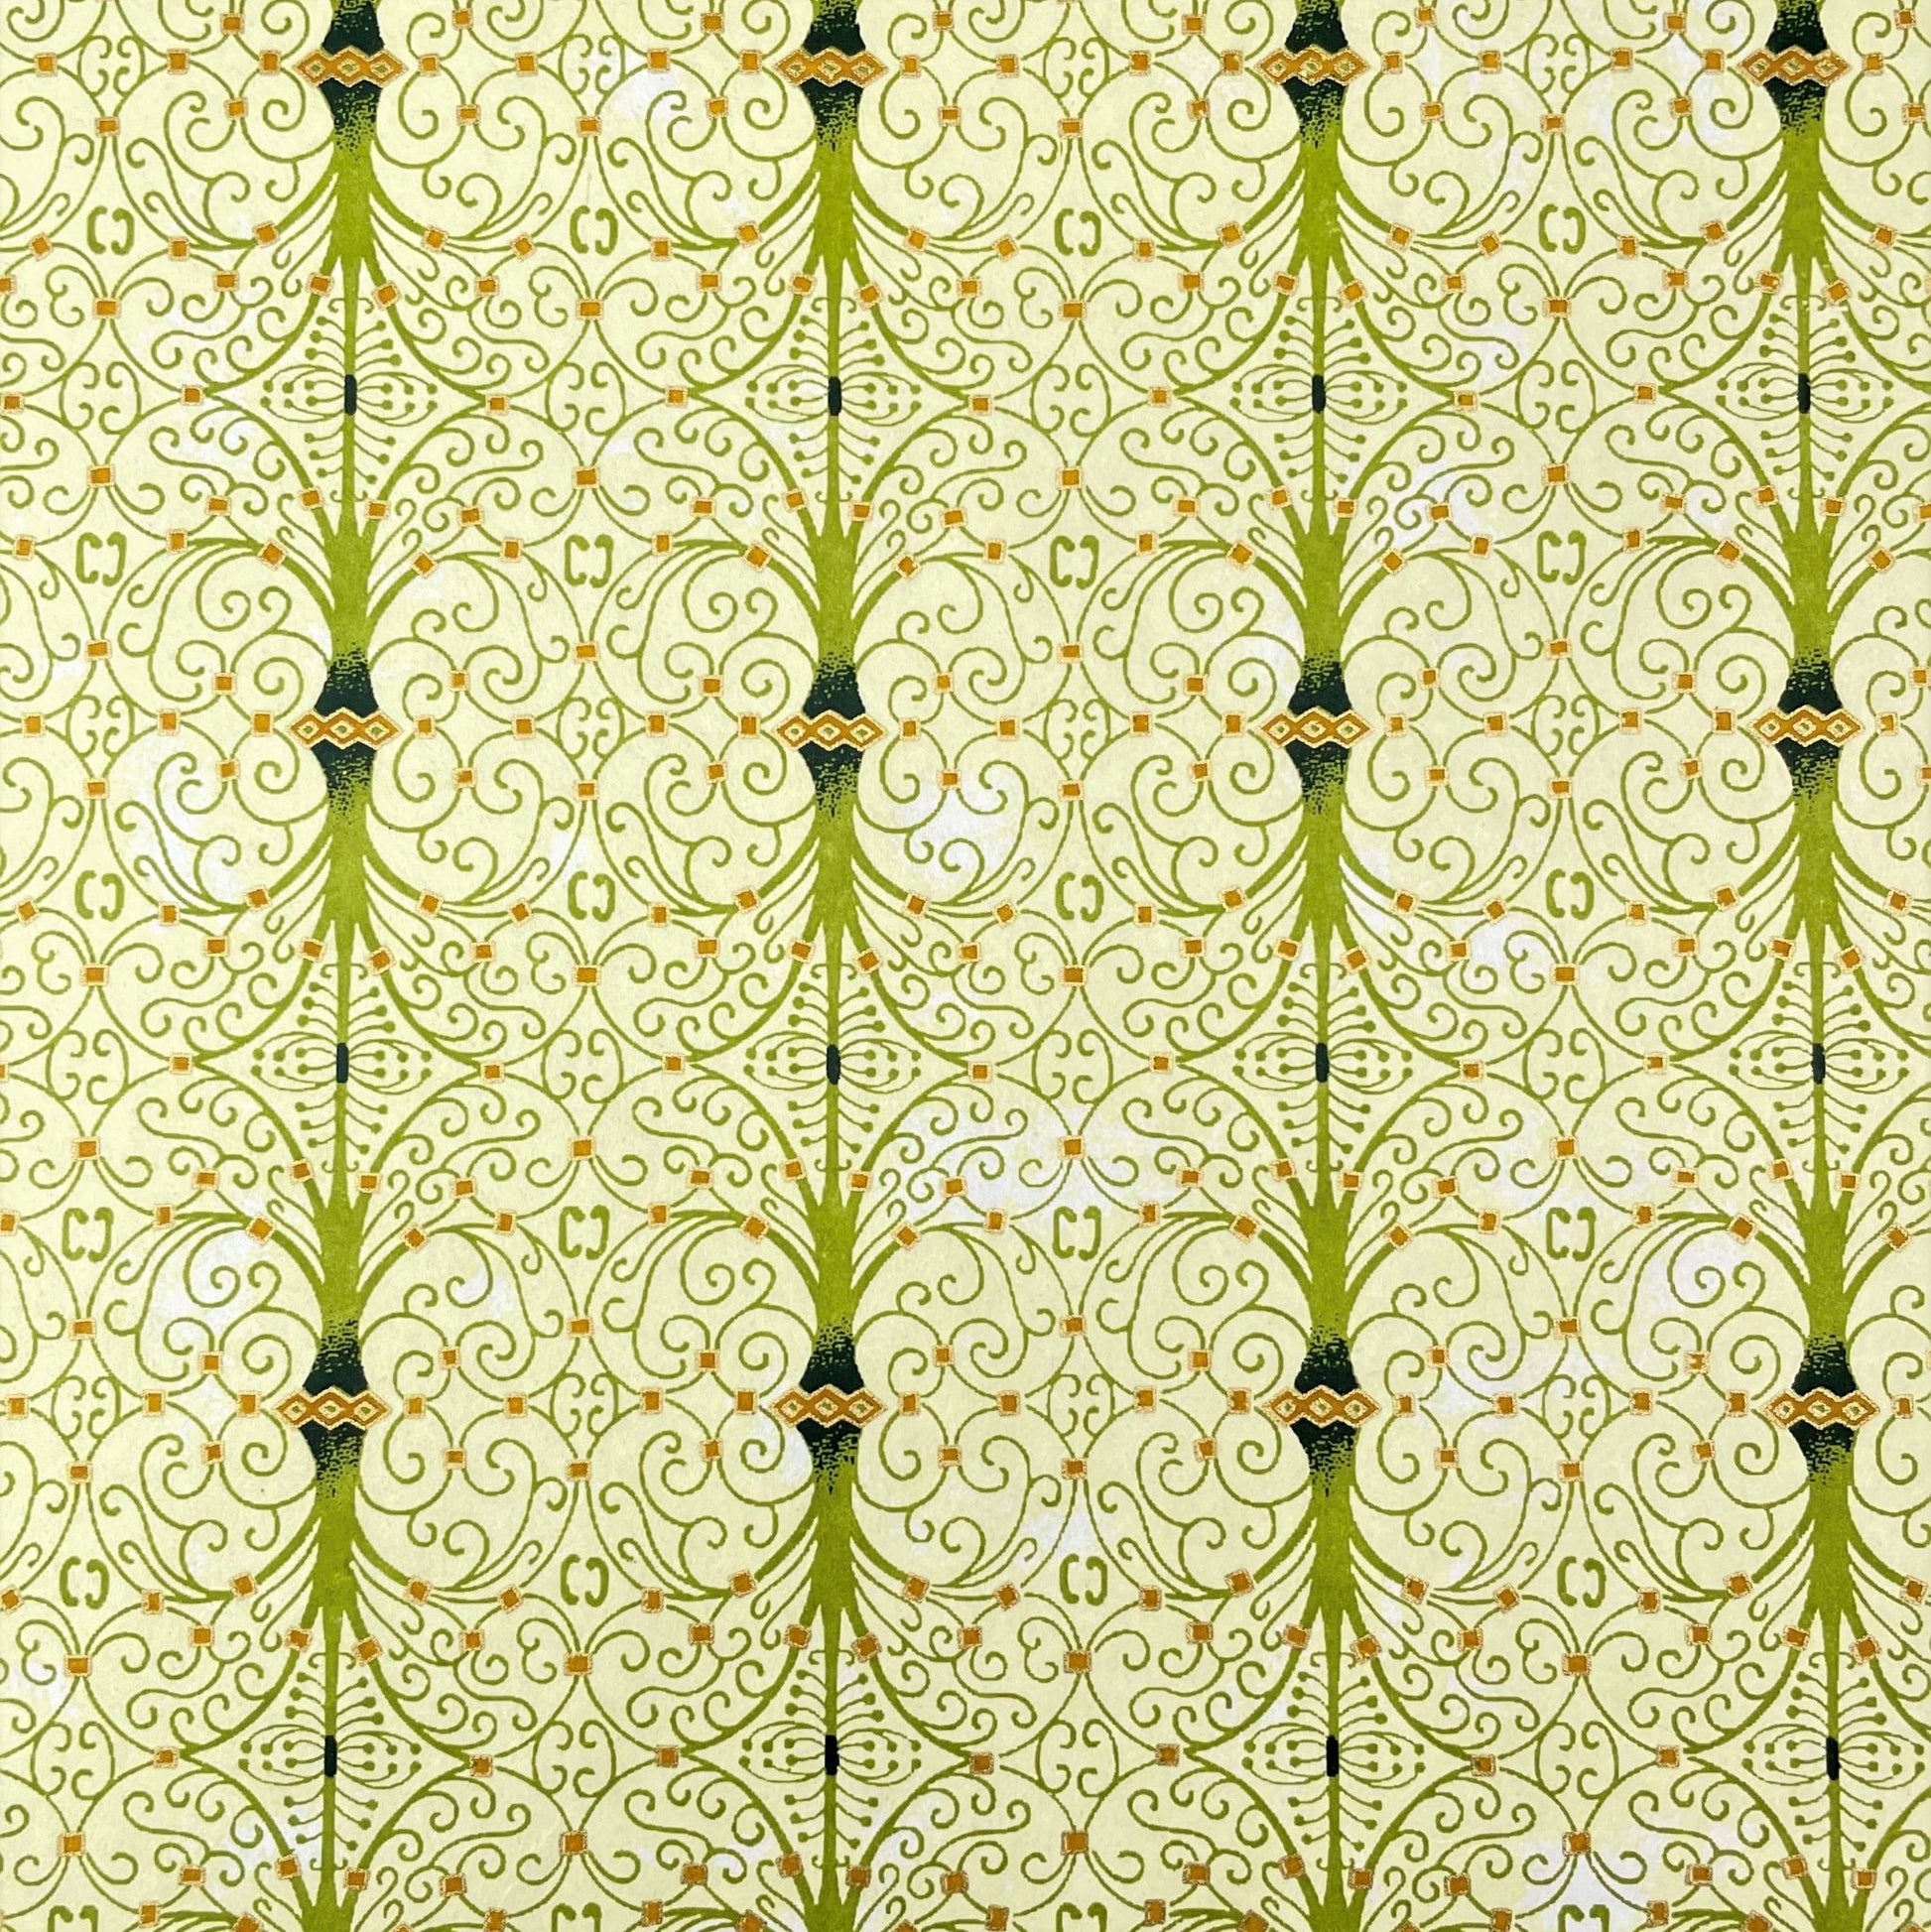 japanese silk-screen handmade paper showing green filigree pattern with gold accents